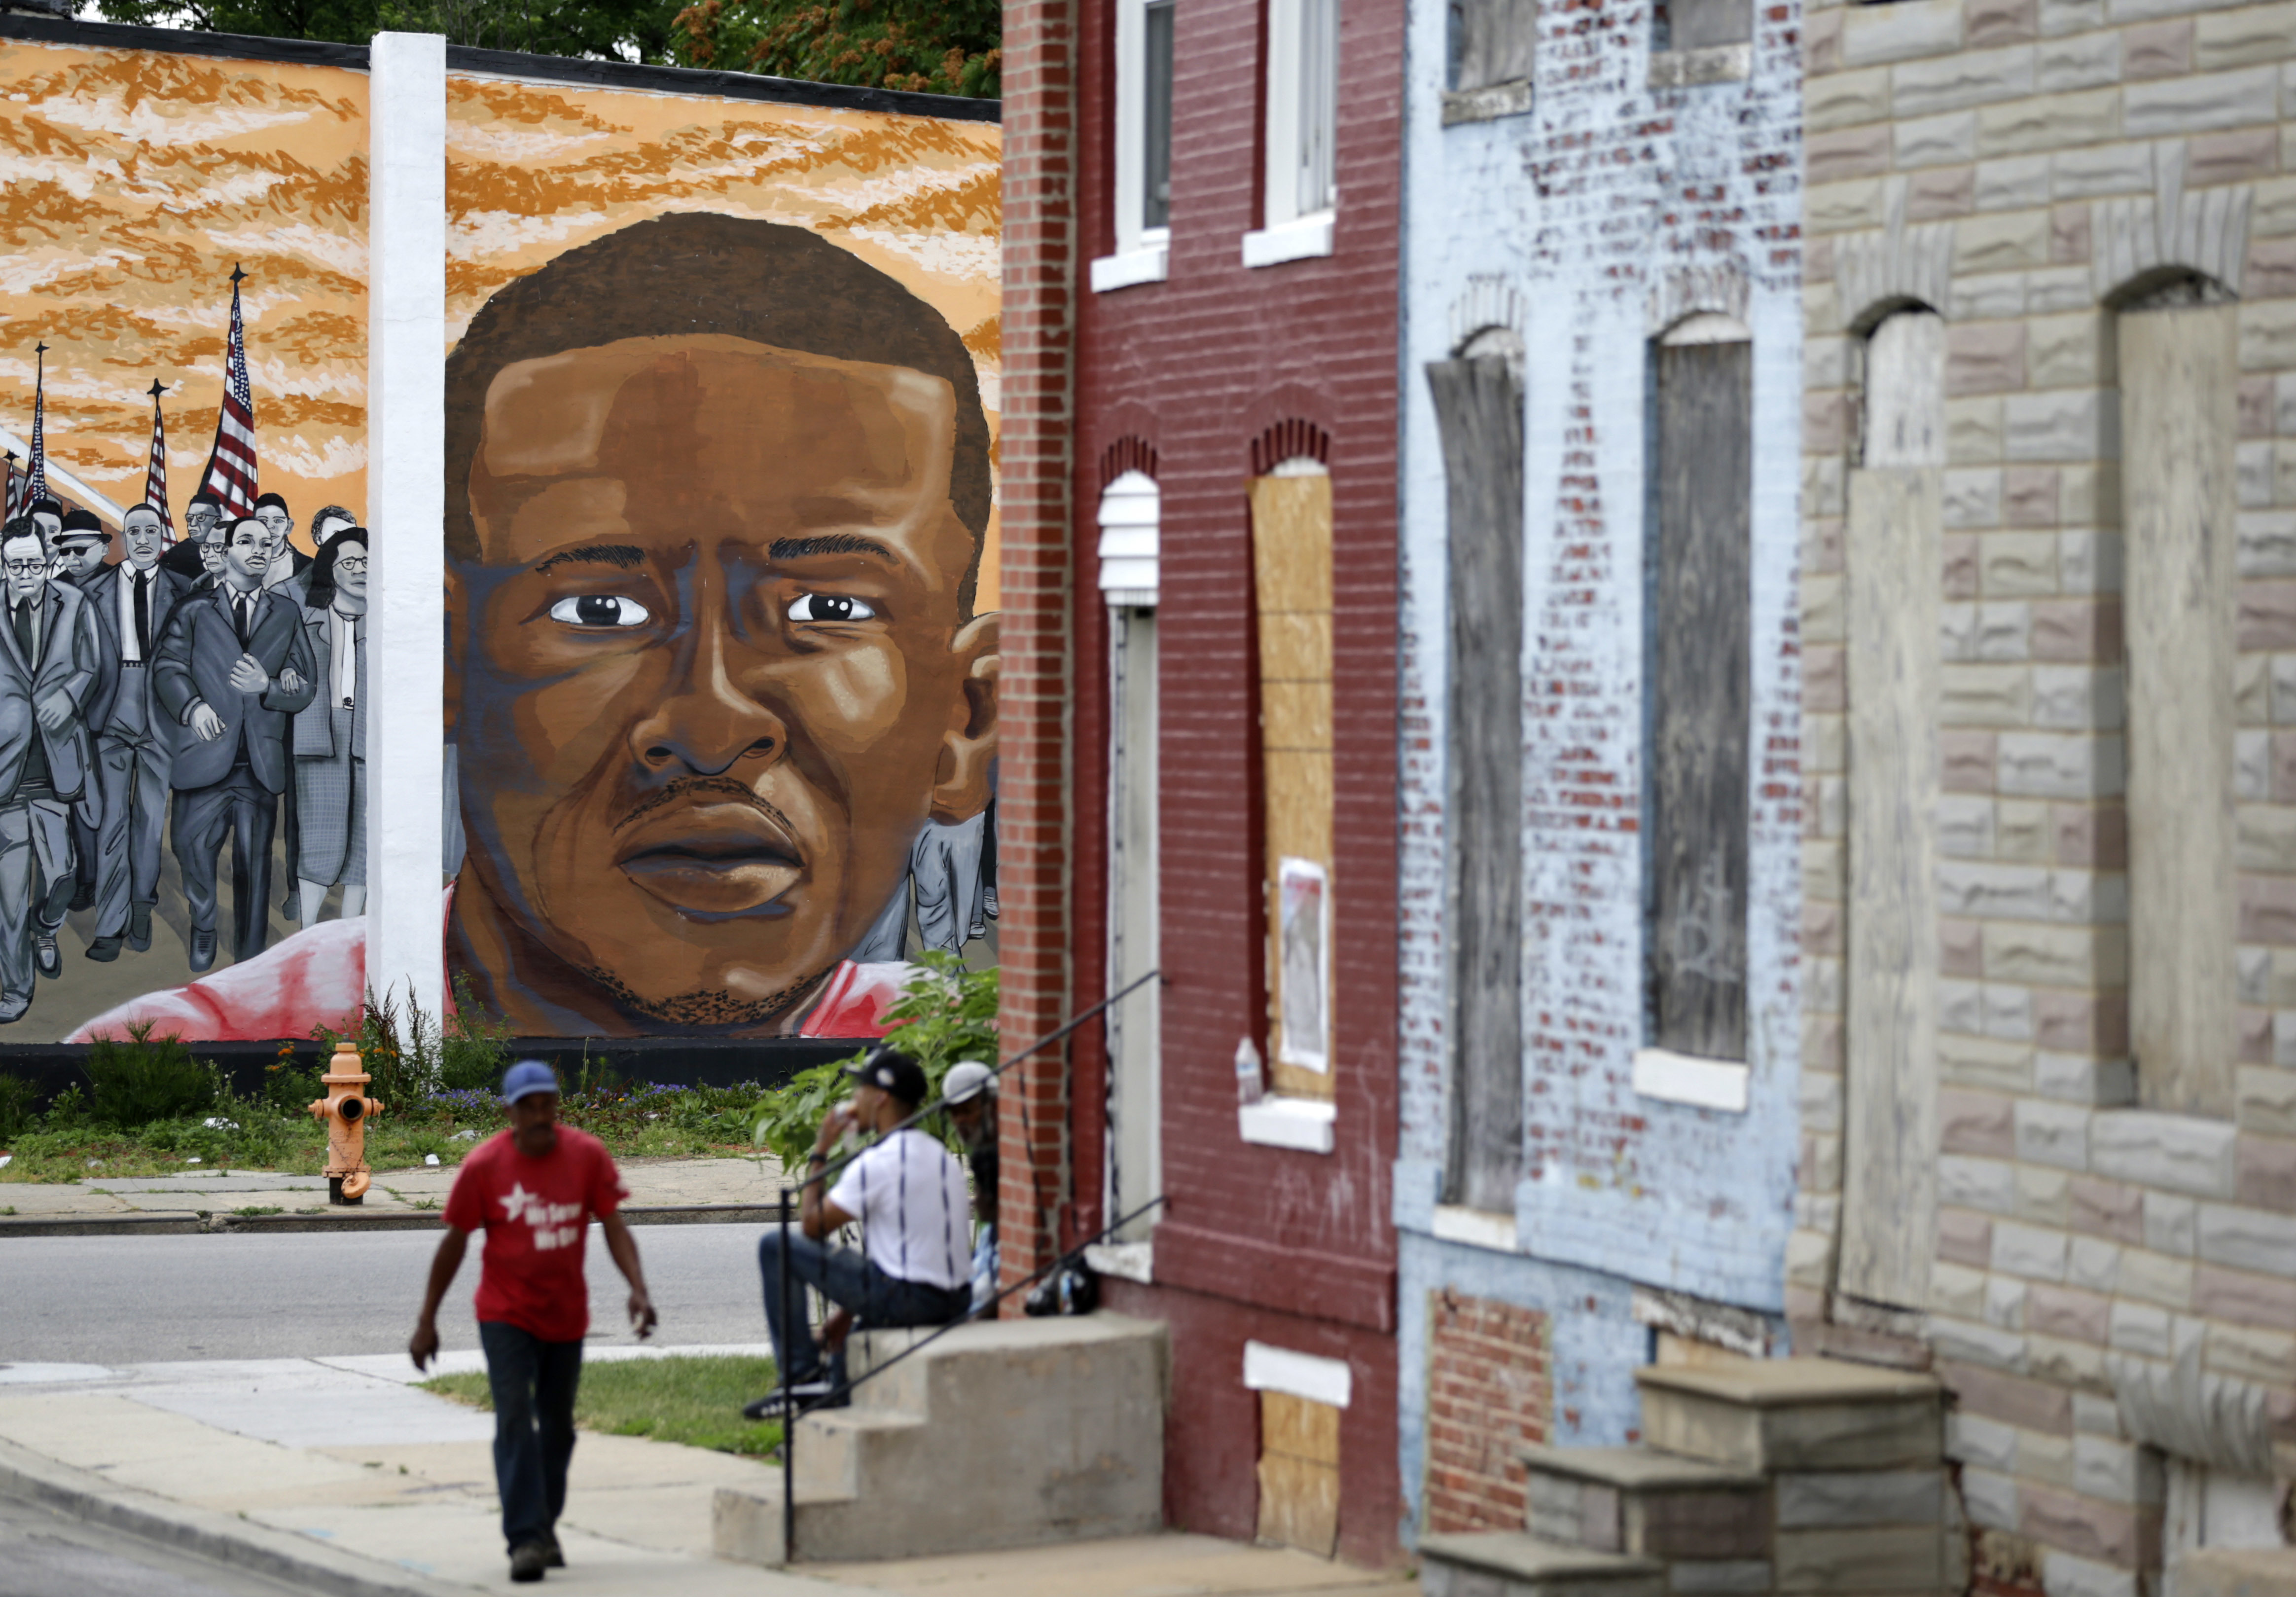 People walk by a mural depicting Freddie Gray in Baltimore on June 23, at the intersection where Gray was arrested in 2015.